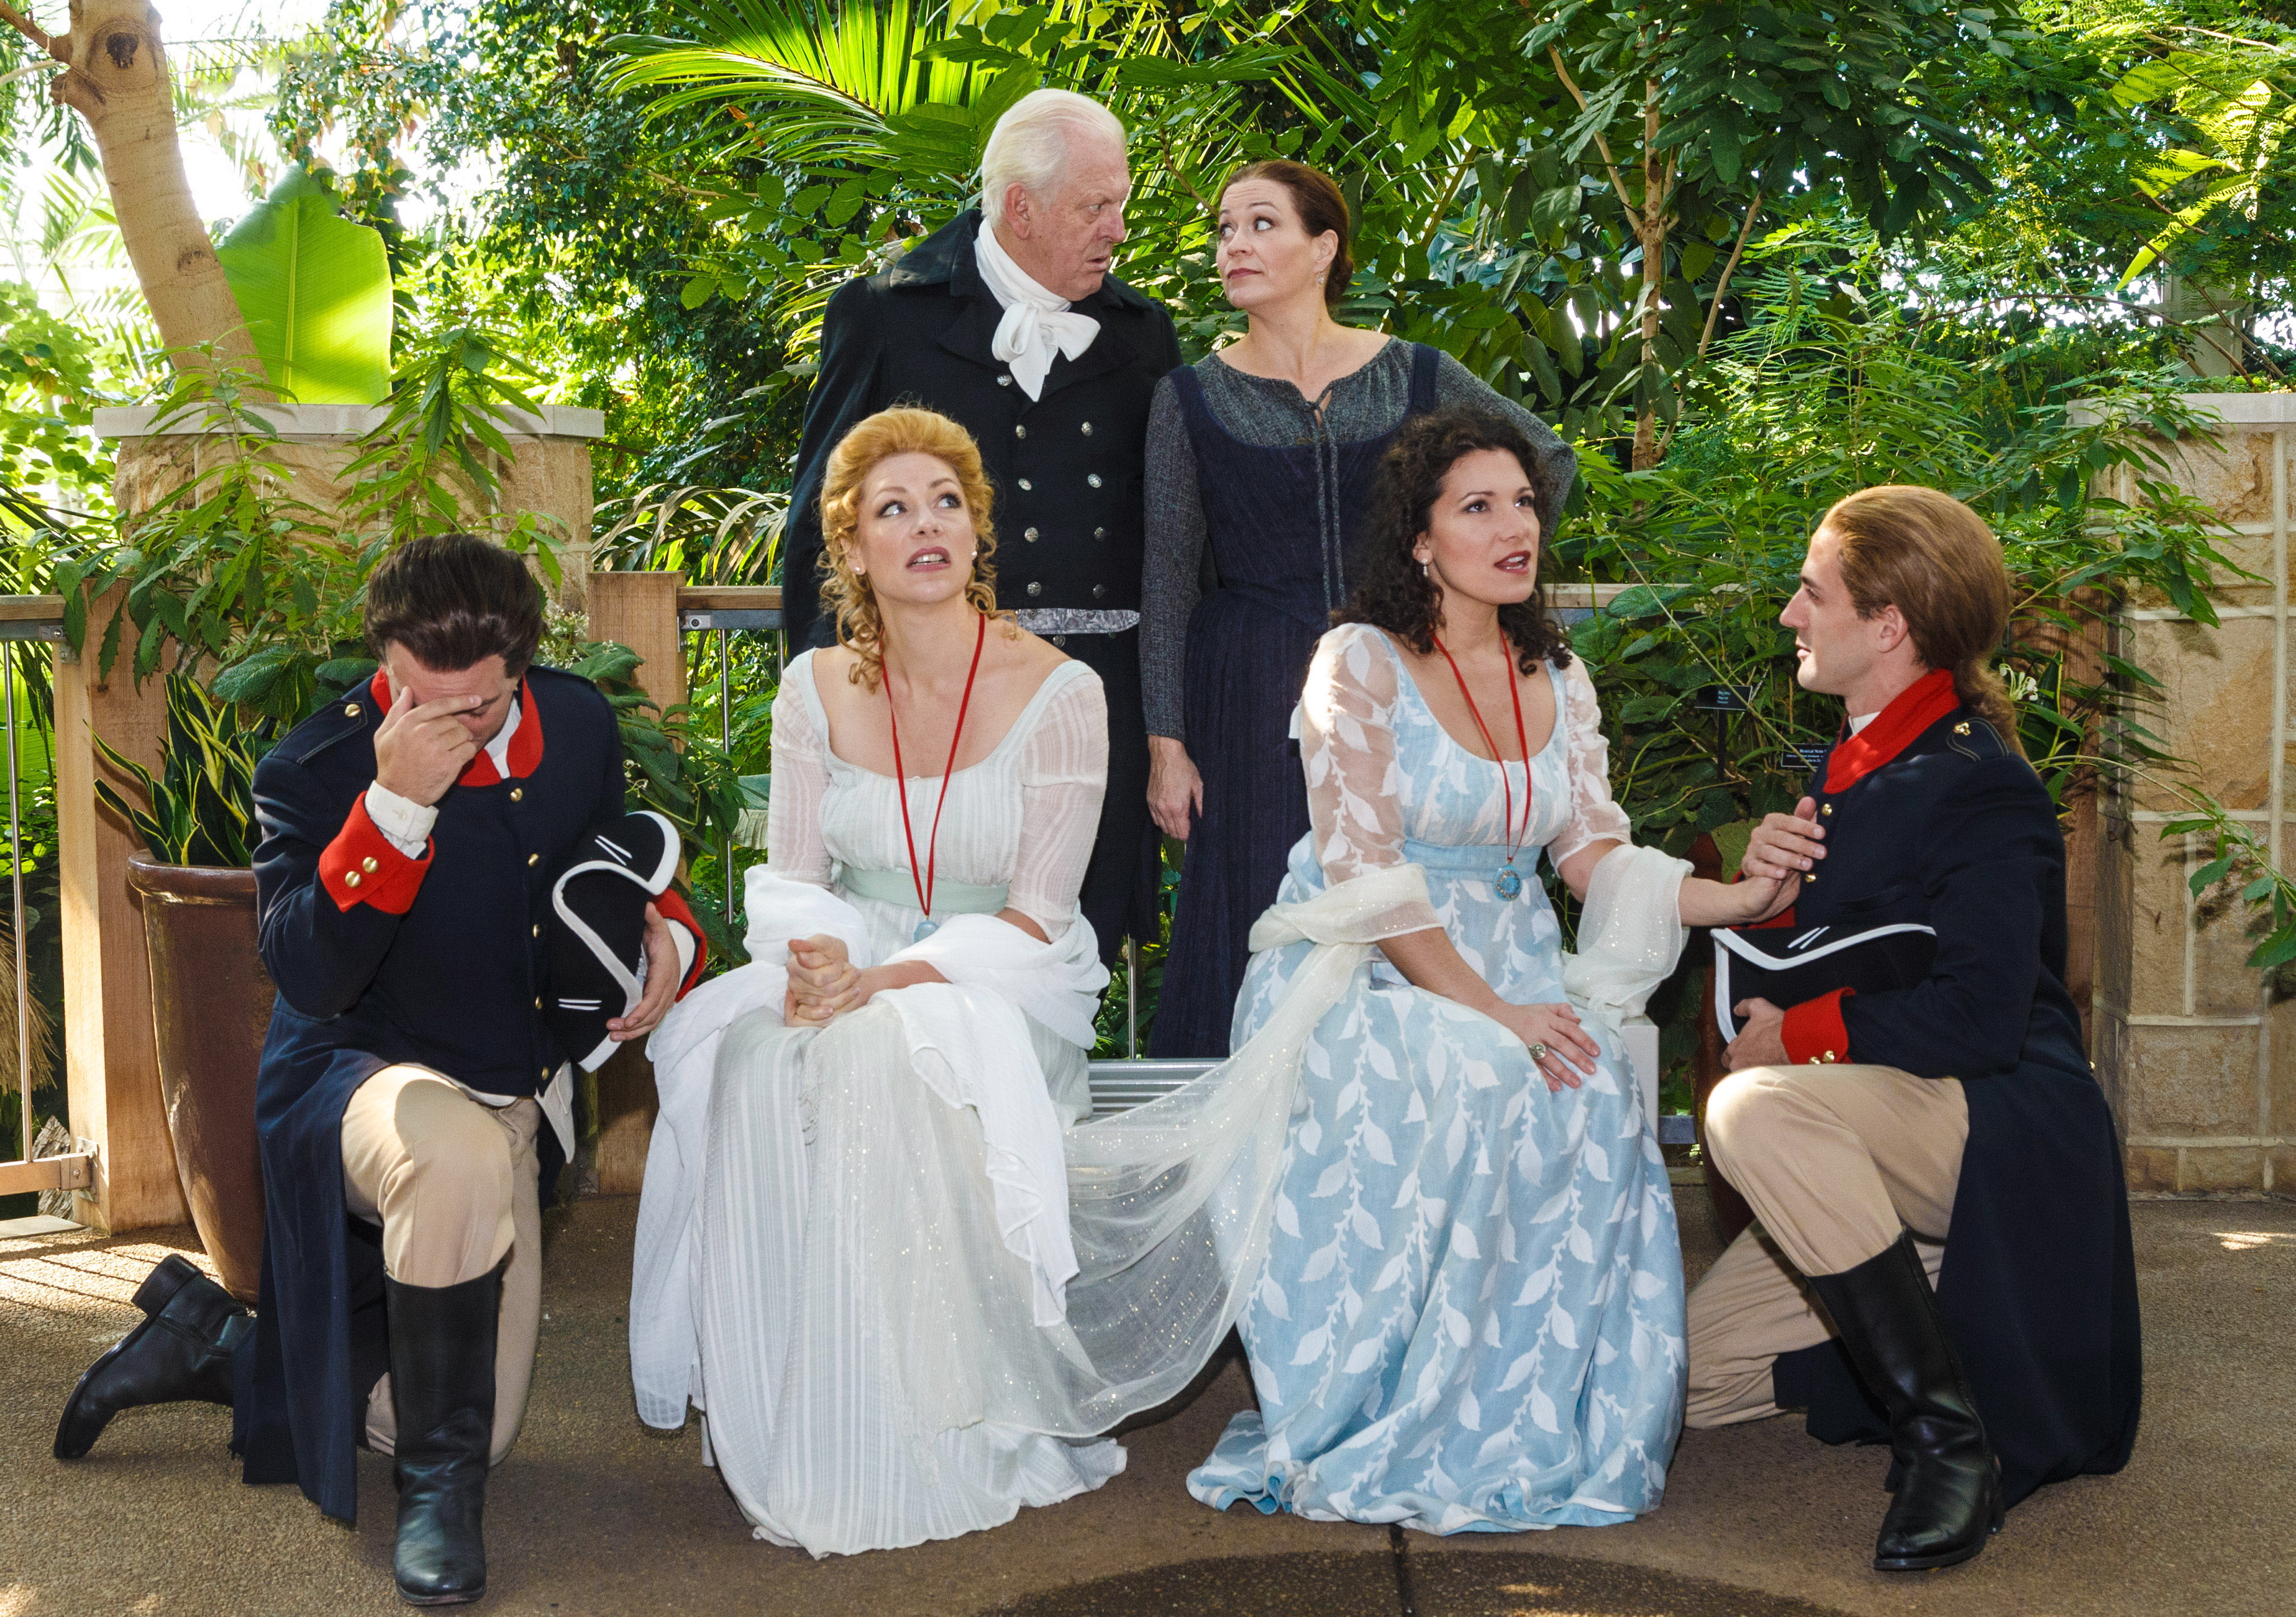 Hmm, hmm, so many new plays, what shall we see? Actually these are lead cast members in an old classic, Mozart's "Cosi Fan Tutte" at Pittsburgh Opera. Front, L to R: Christopher Tiesi, Jennifer Holloway, Danielle Pastin, Hadleigh Adams. Standing: Sir Thomas Allen and Sari Gruber.